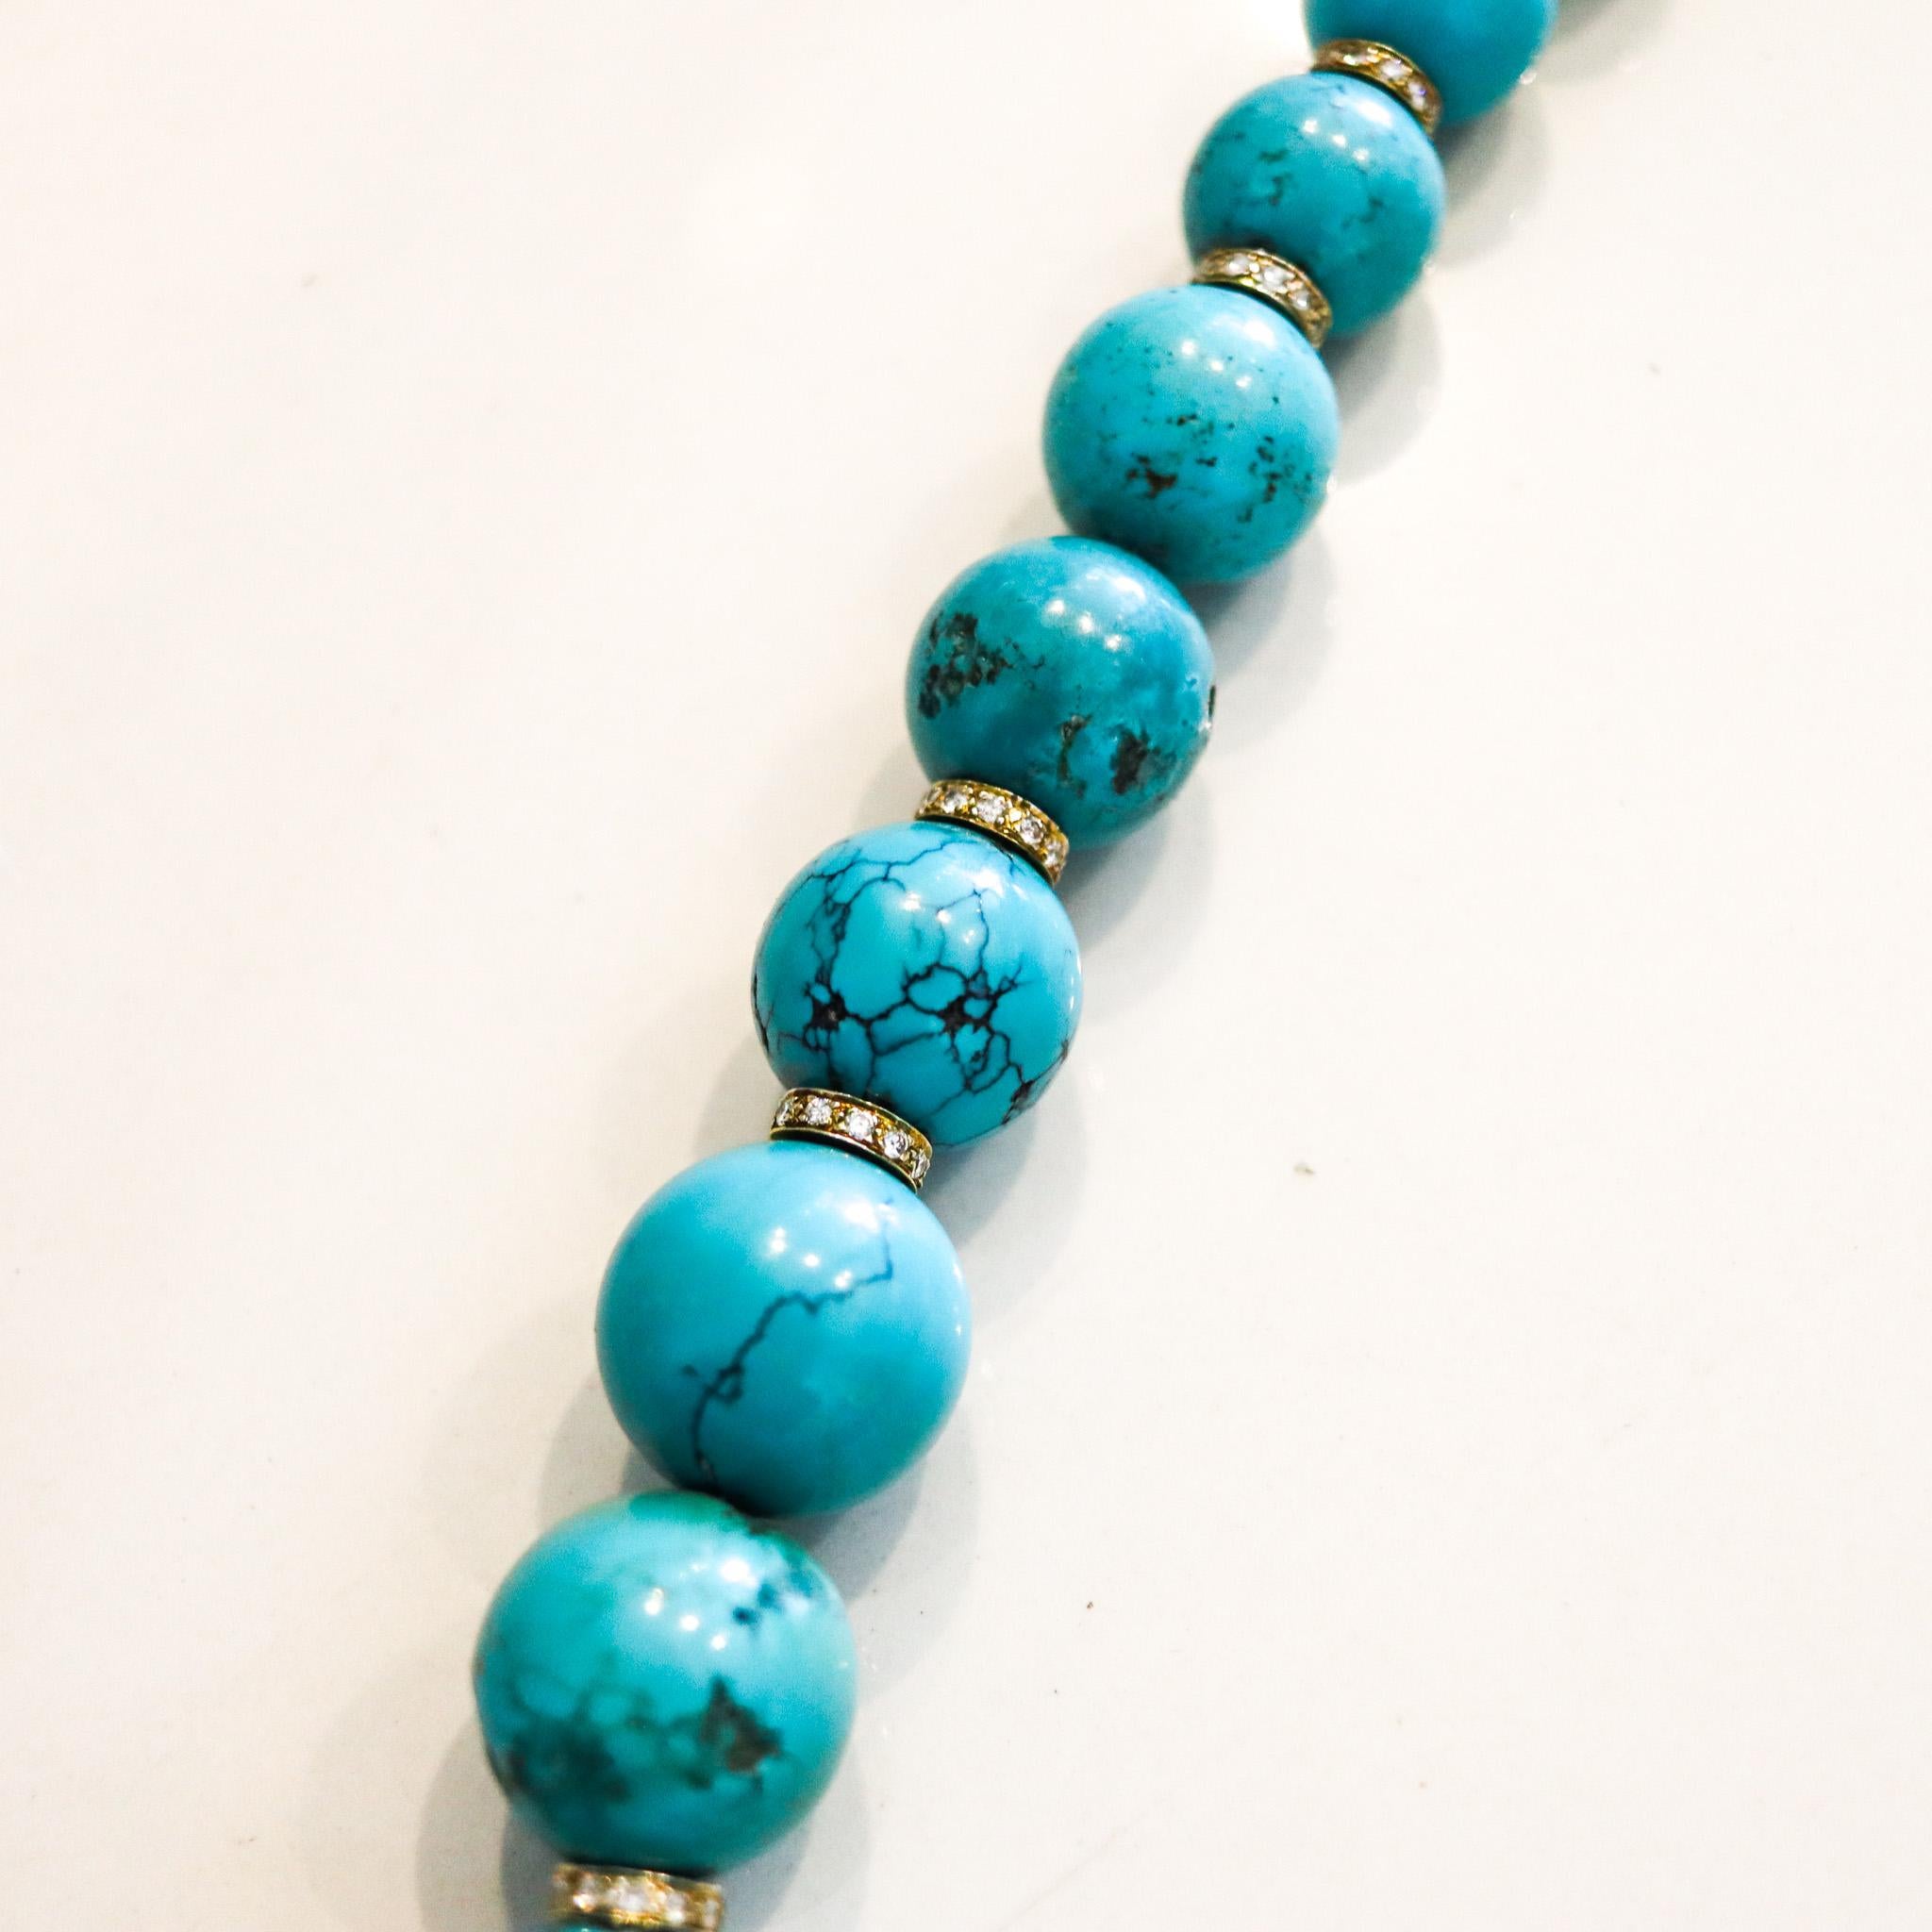 Nani Cesare Modernist Turquoise Long Necklace 18Kt Gold With 14.06 Ctw Diamonds In Excellent Condition For Sale In Miami, FL